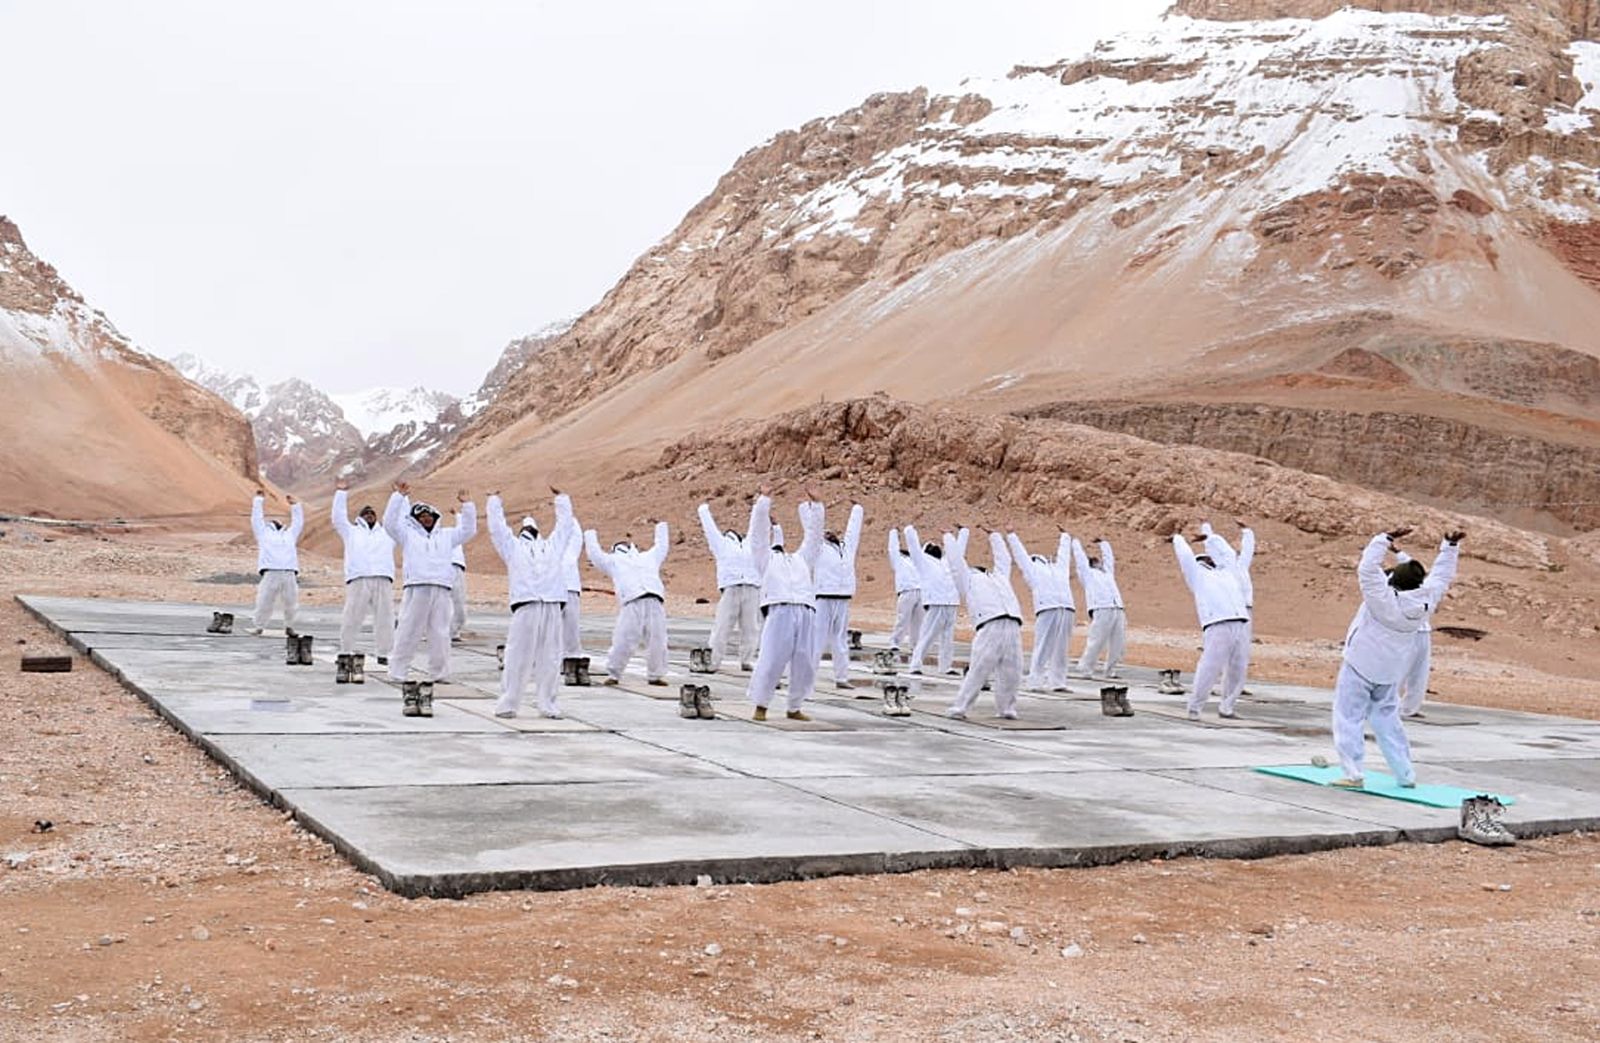 epa09289868 A handout photo made available by the Indo-Tibetan Border Police (ITBP) shows Indo-Tibetan Border Police officers performing yoga during the International Day of Yoga at a height of about 15,000 feet in Ladakh, India, 21 June 2021. In December 2014, the United Nations (UN) declared 21 June as the International Day of Yoga after adopting a resolution proposed by Indian Prime Minister Narendra Modi.  EPA/INDO-TIBETAN BORDER POLICE HANDOUT  HANDOUT EDITORIAL USE ONLY/NO SALES